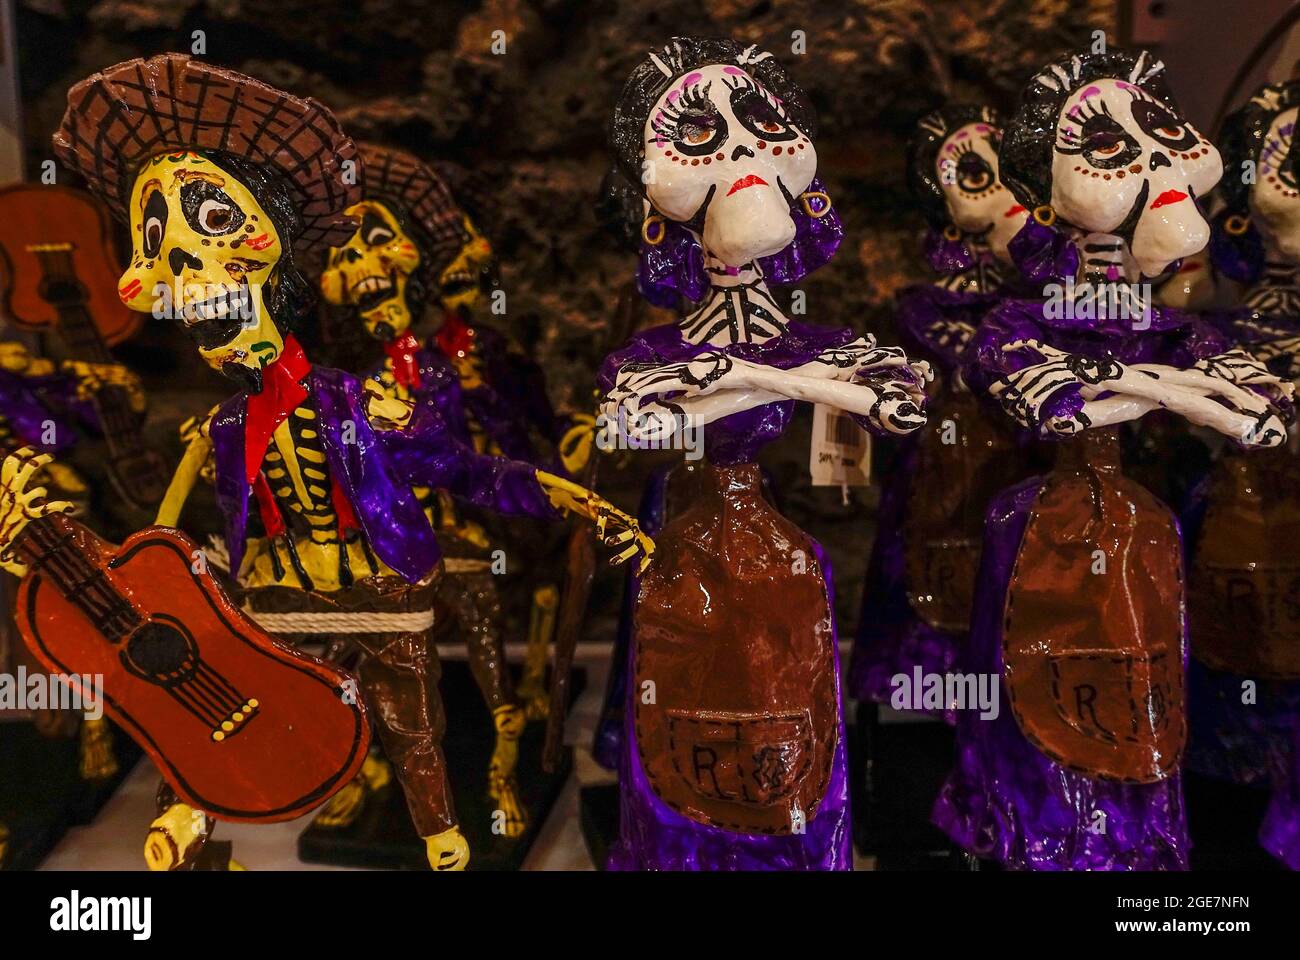 Day of the Dead skeletal figurines Mexico City Mexico Stock Photo